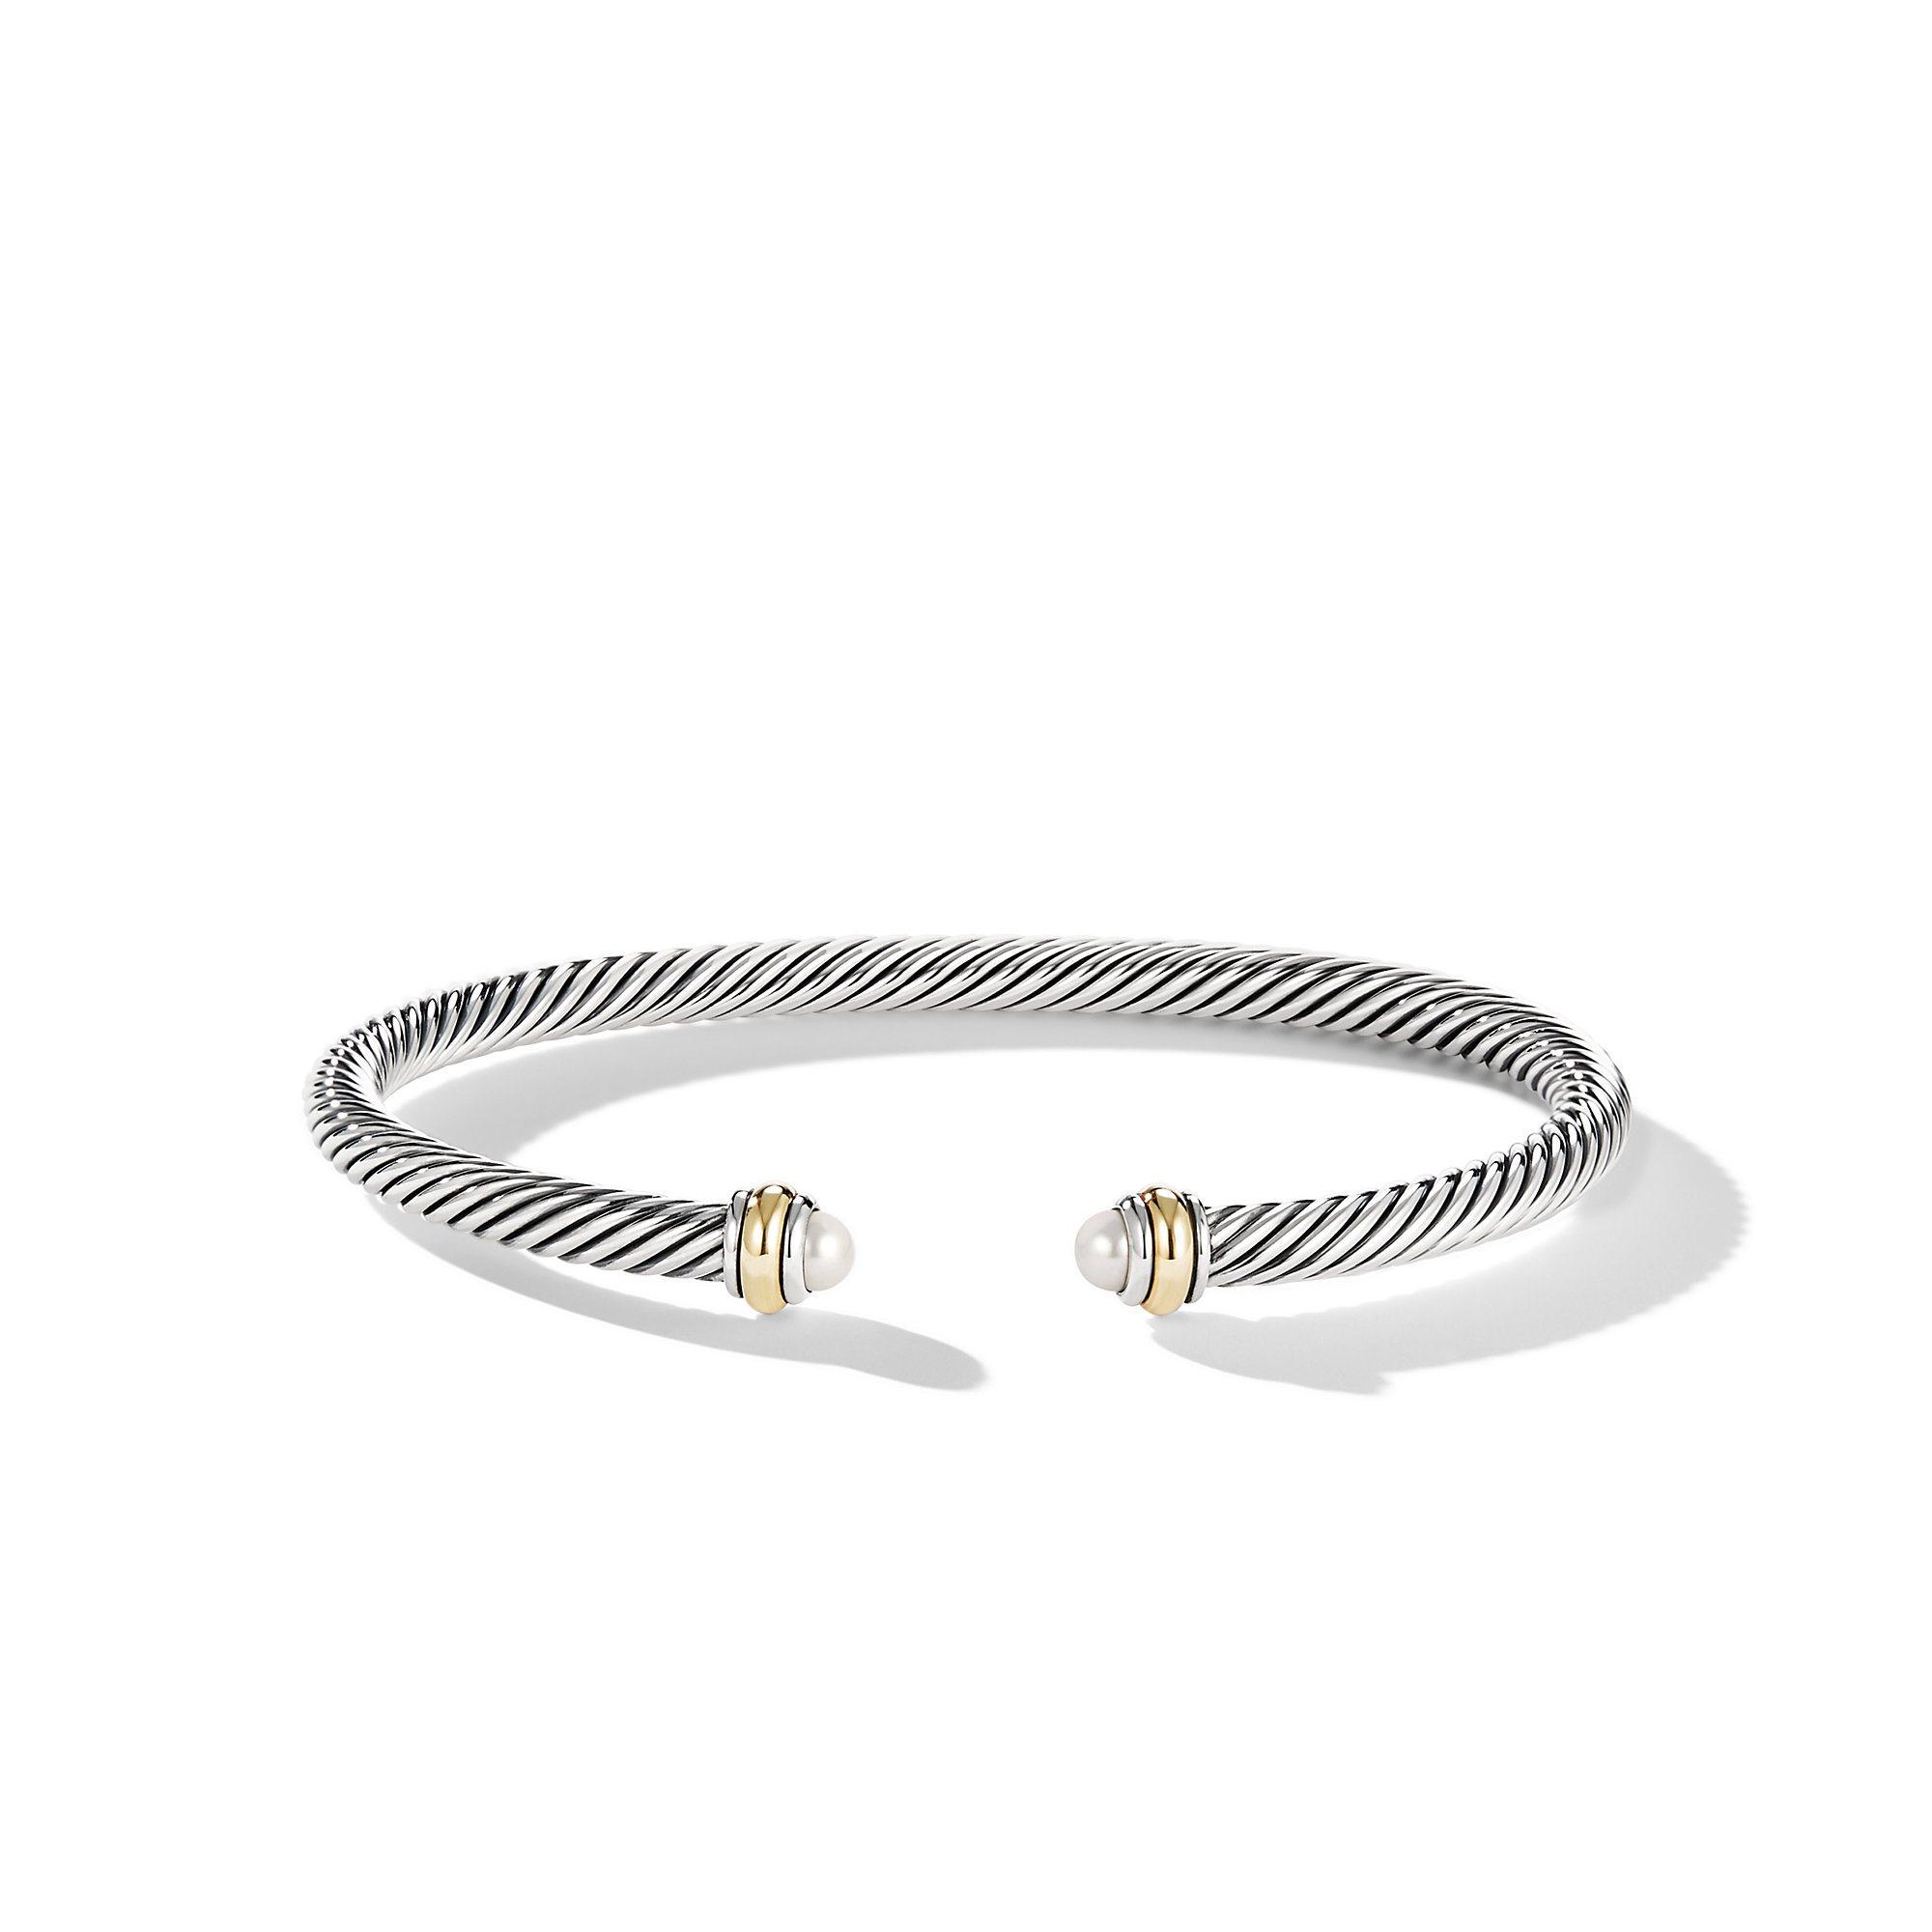 David Yurman Classic Cable 4mm Bracelet in Sterling Silver with 18K Yellow Gold and Pearls